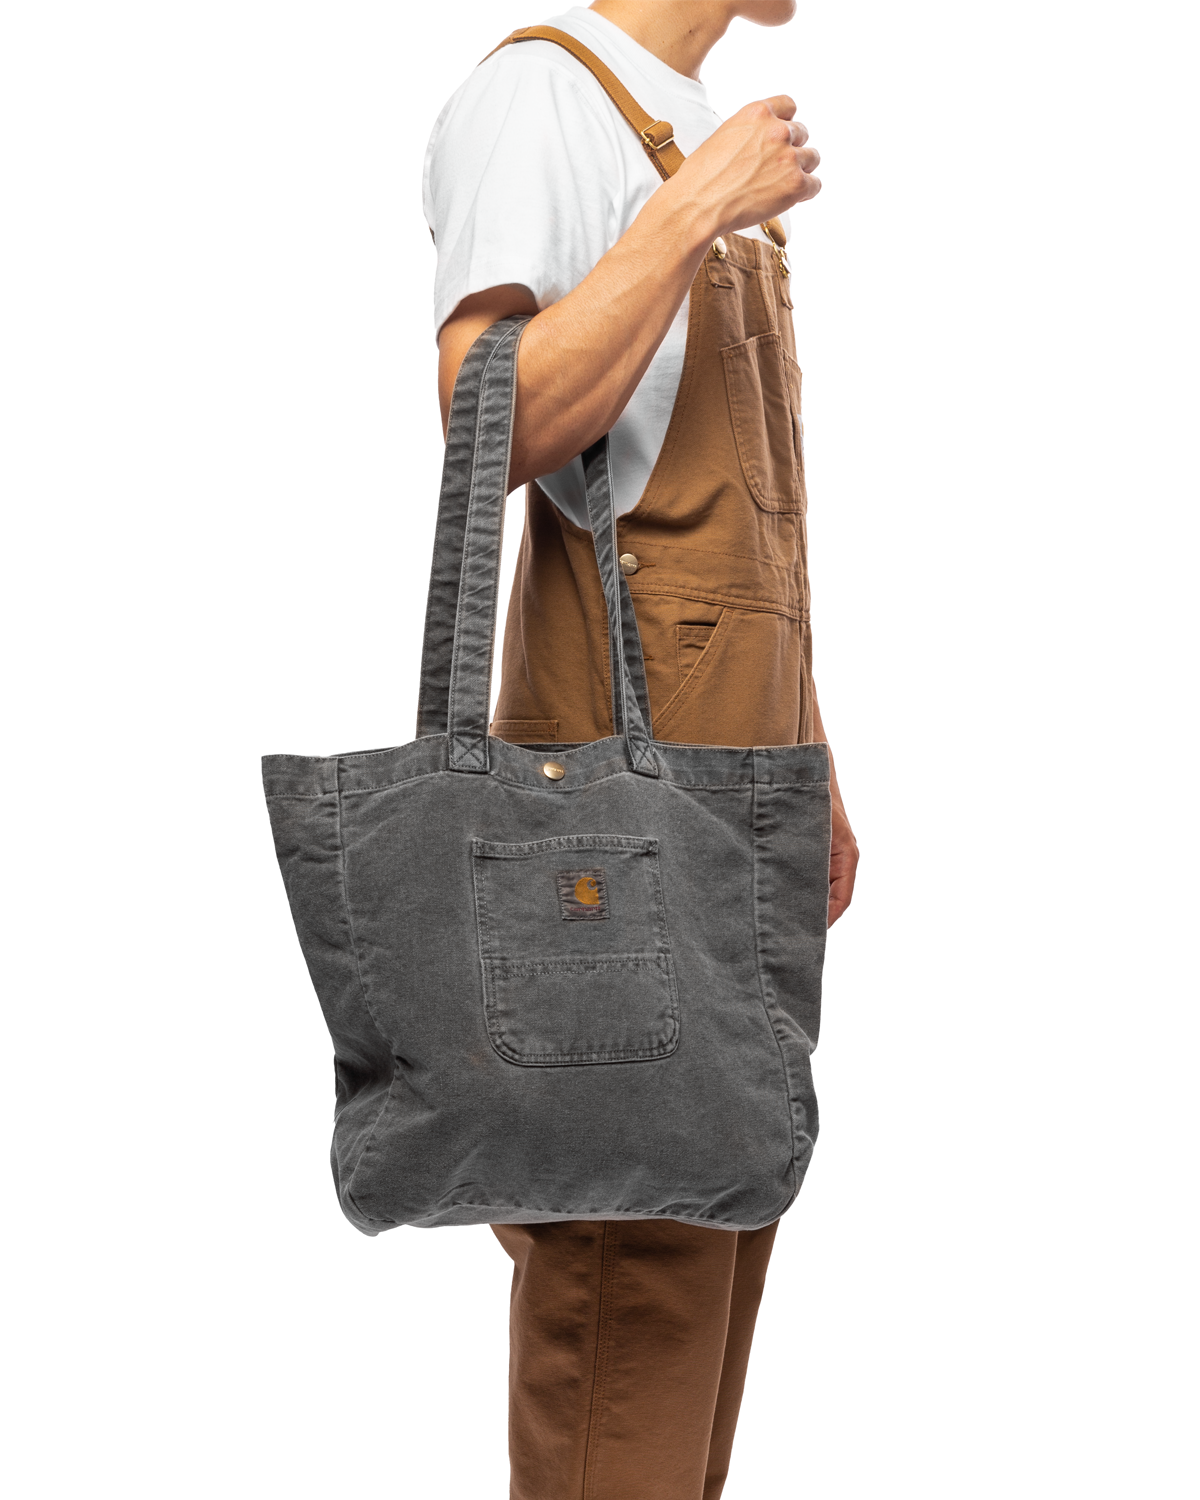 Bayfield Tote